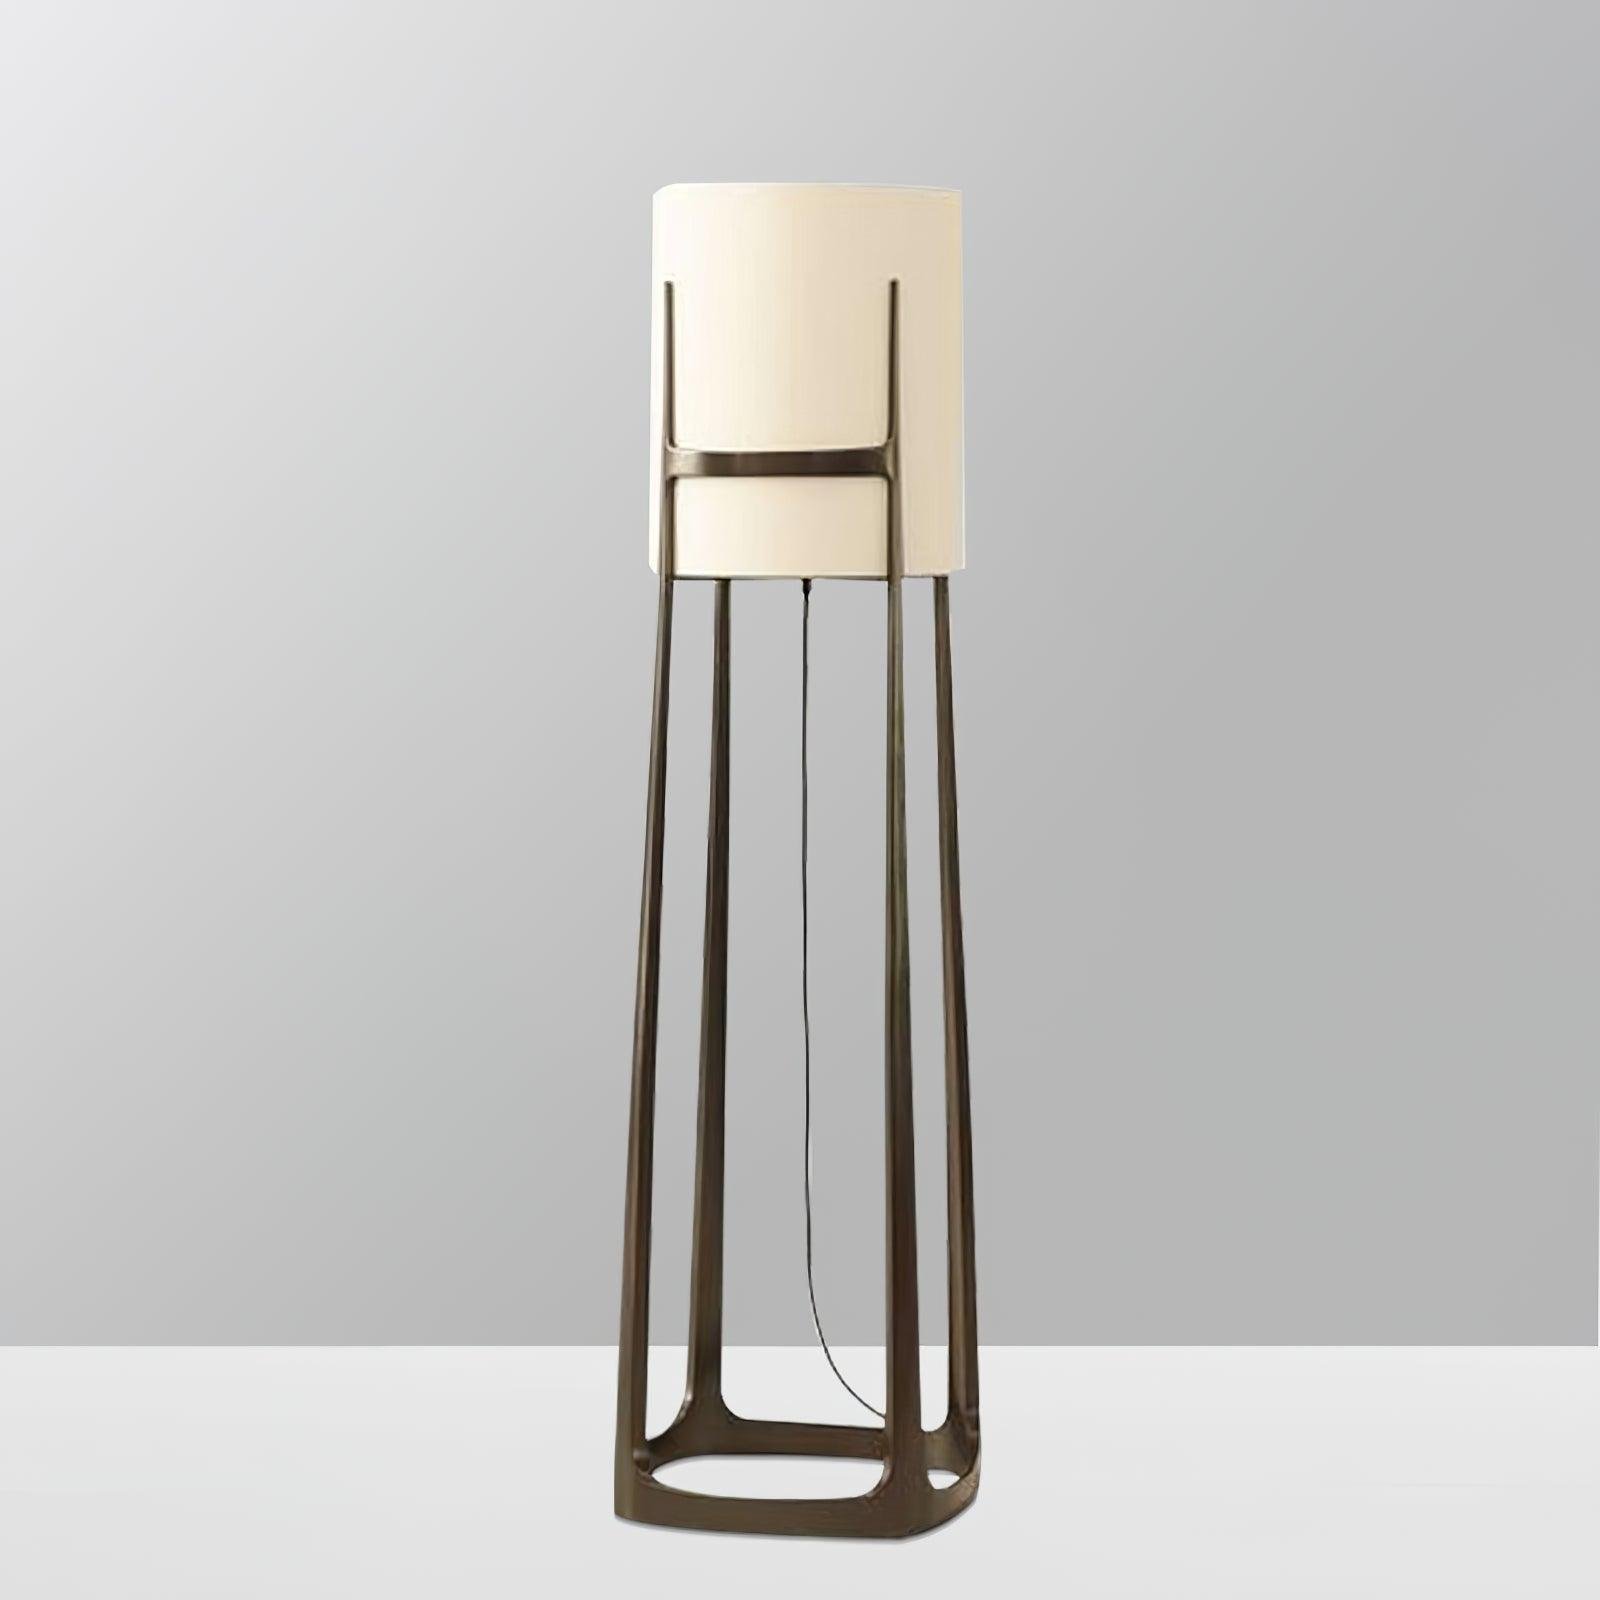 X+L 04 Floor Lamp with a diameter of 15 inches and a height of 64 inches, or 38cm x 162.5cm, featuring a brushed bronze finish and a UK plug.